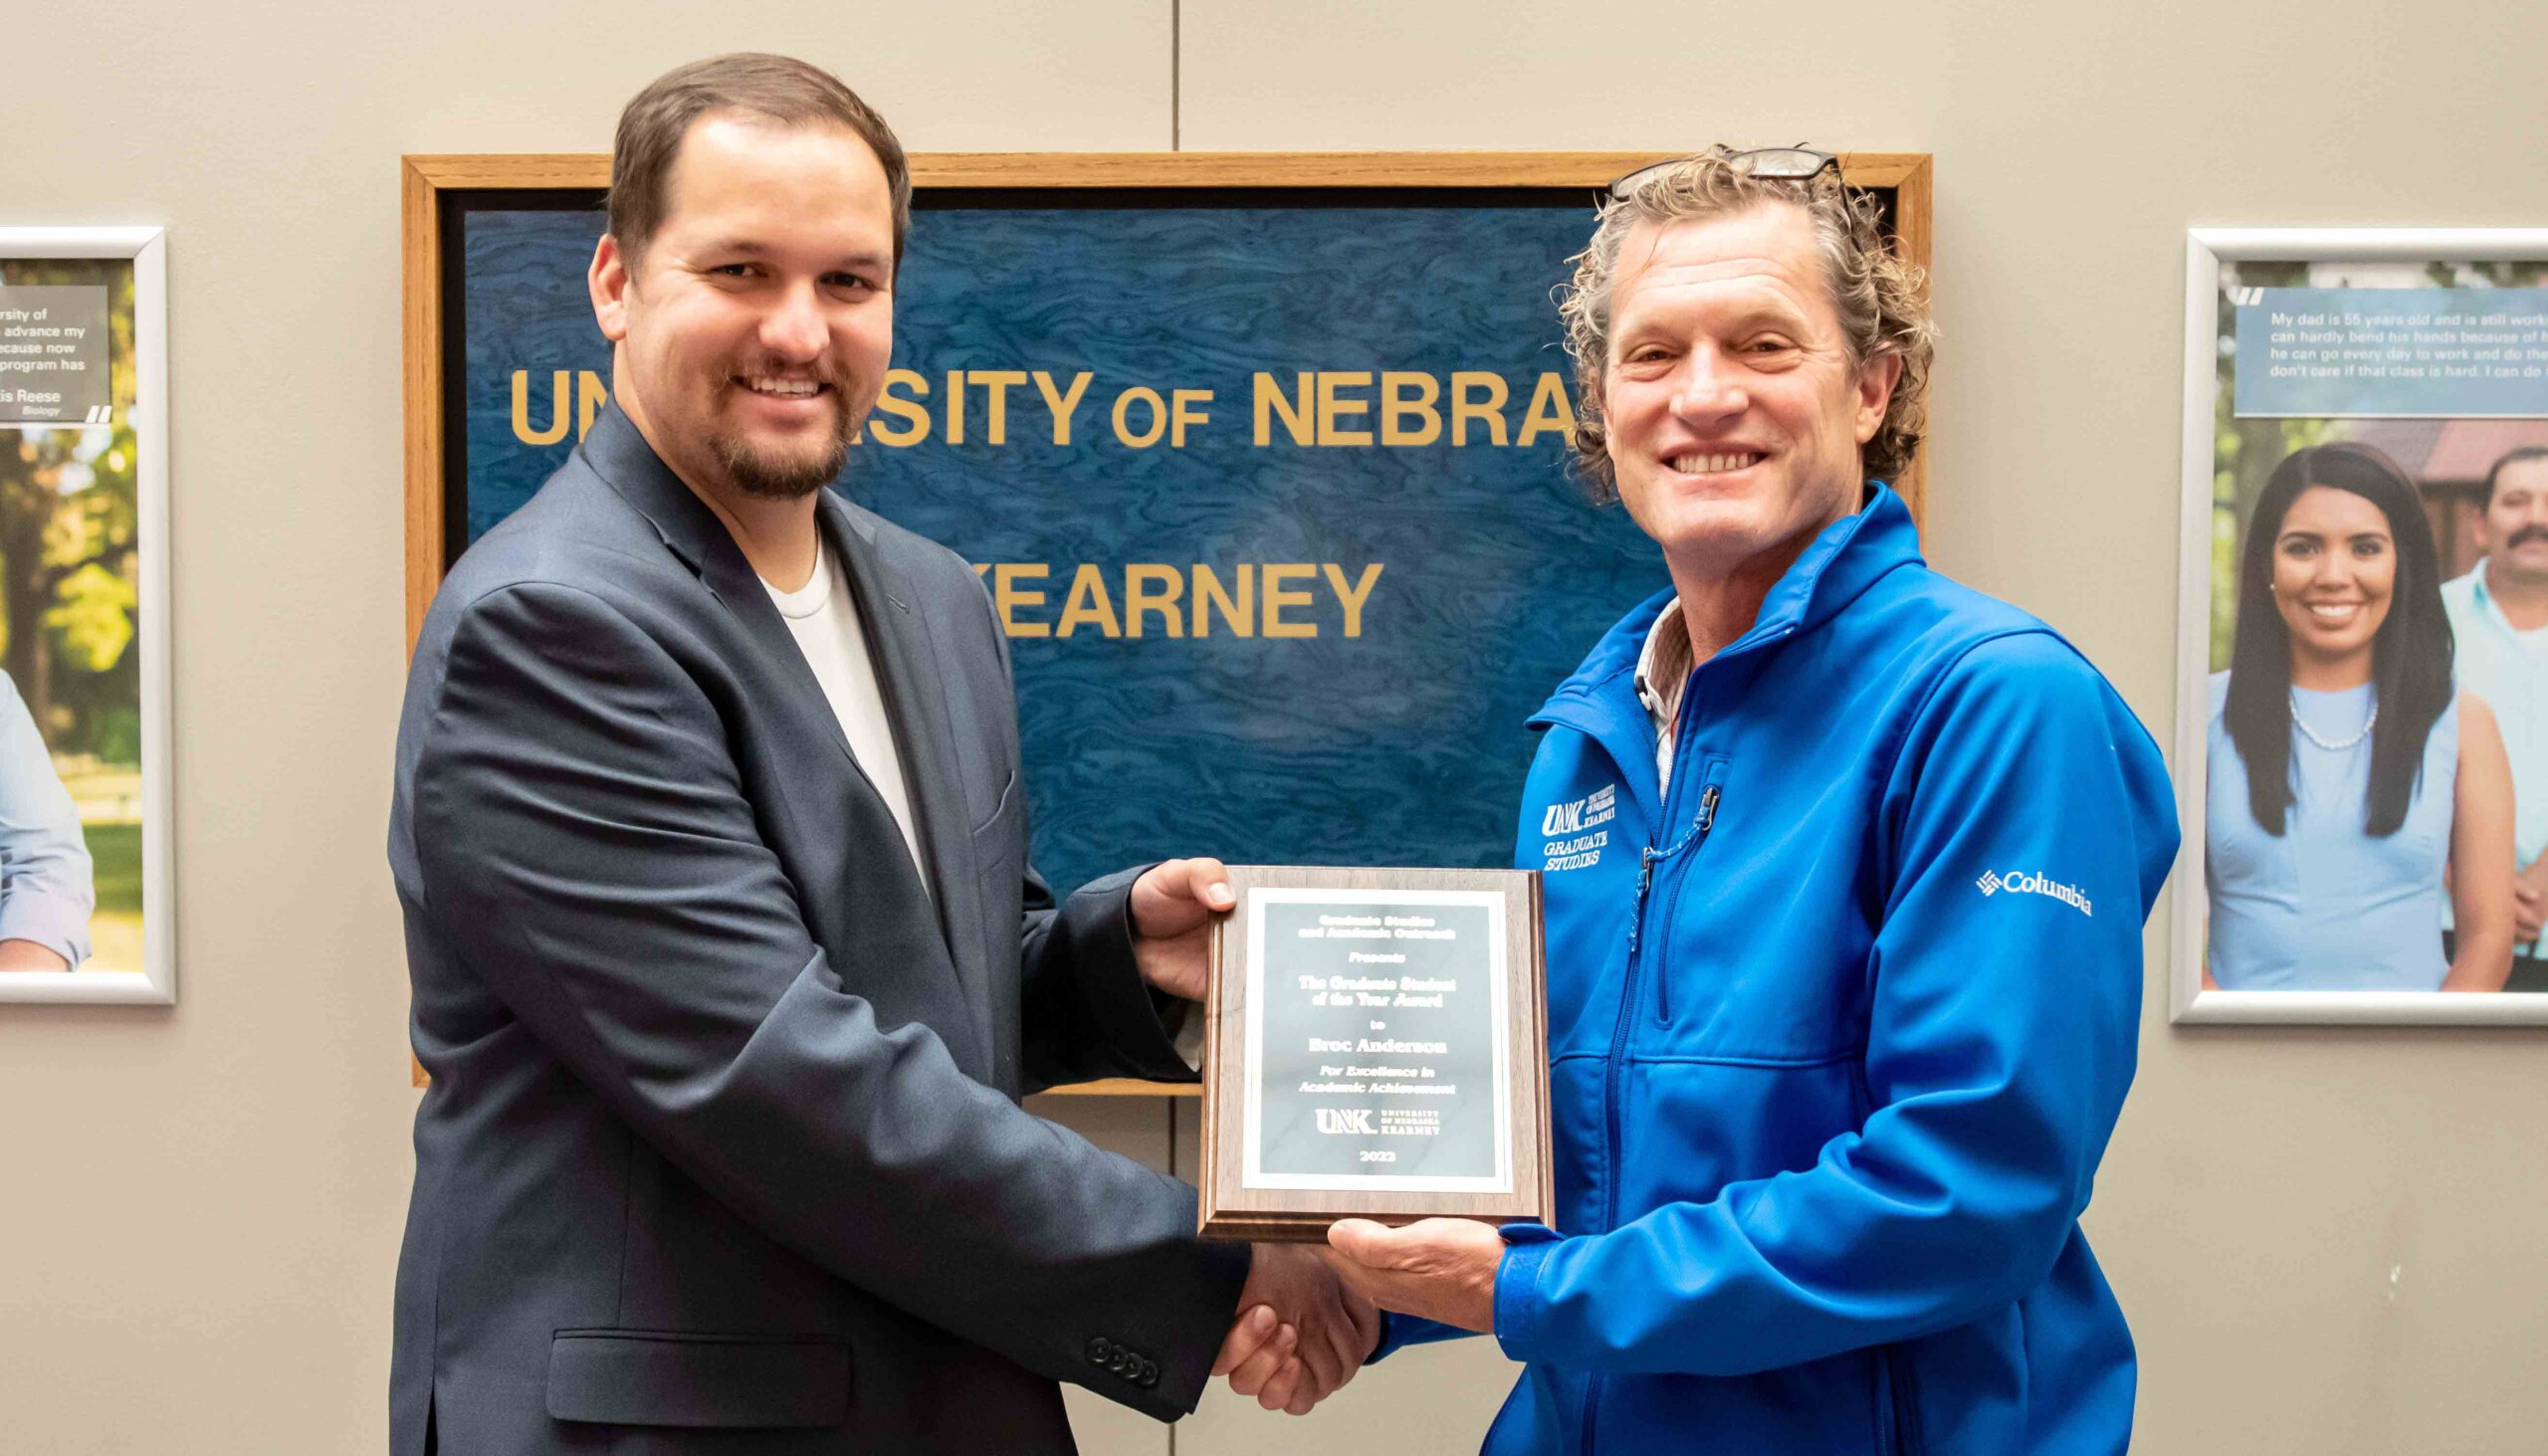 UNK Online student Broc Anderson named inaugural Graduate Student of the Year